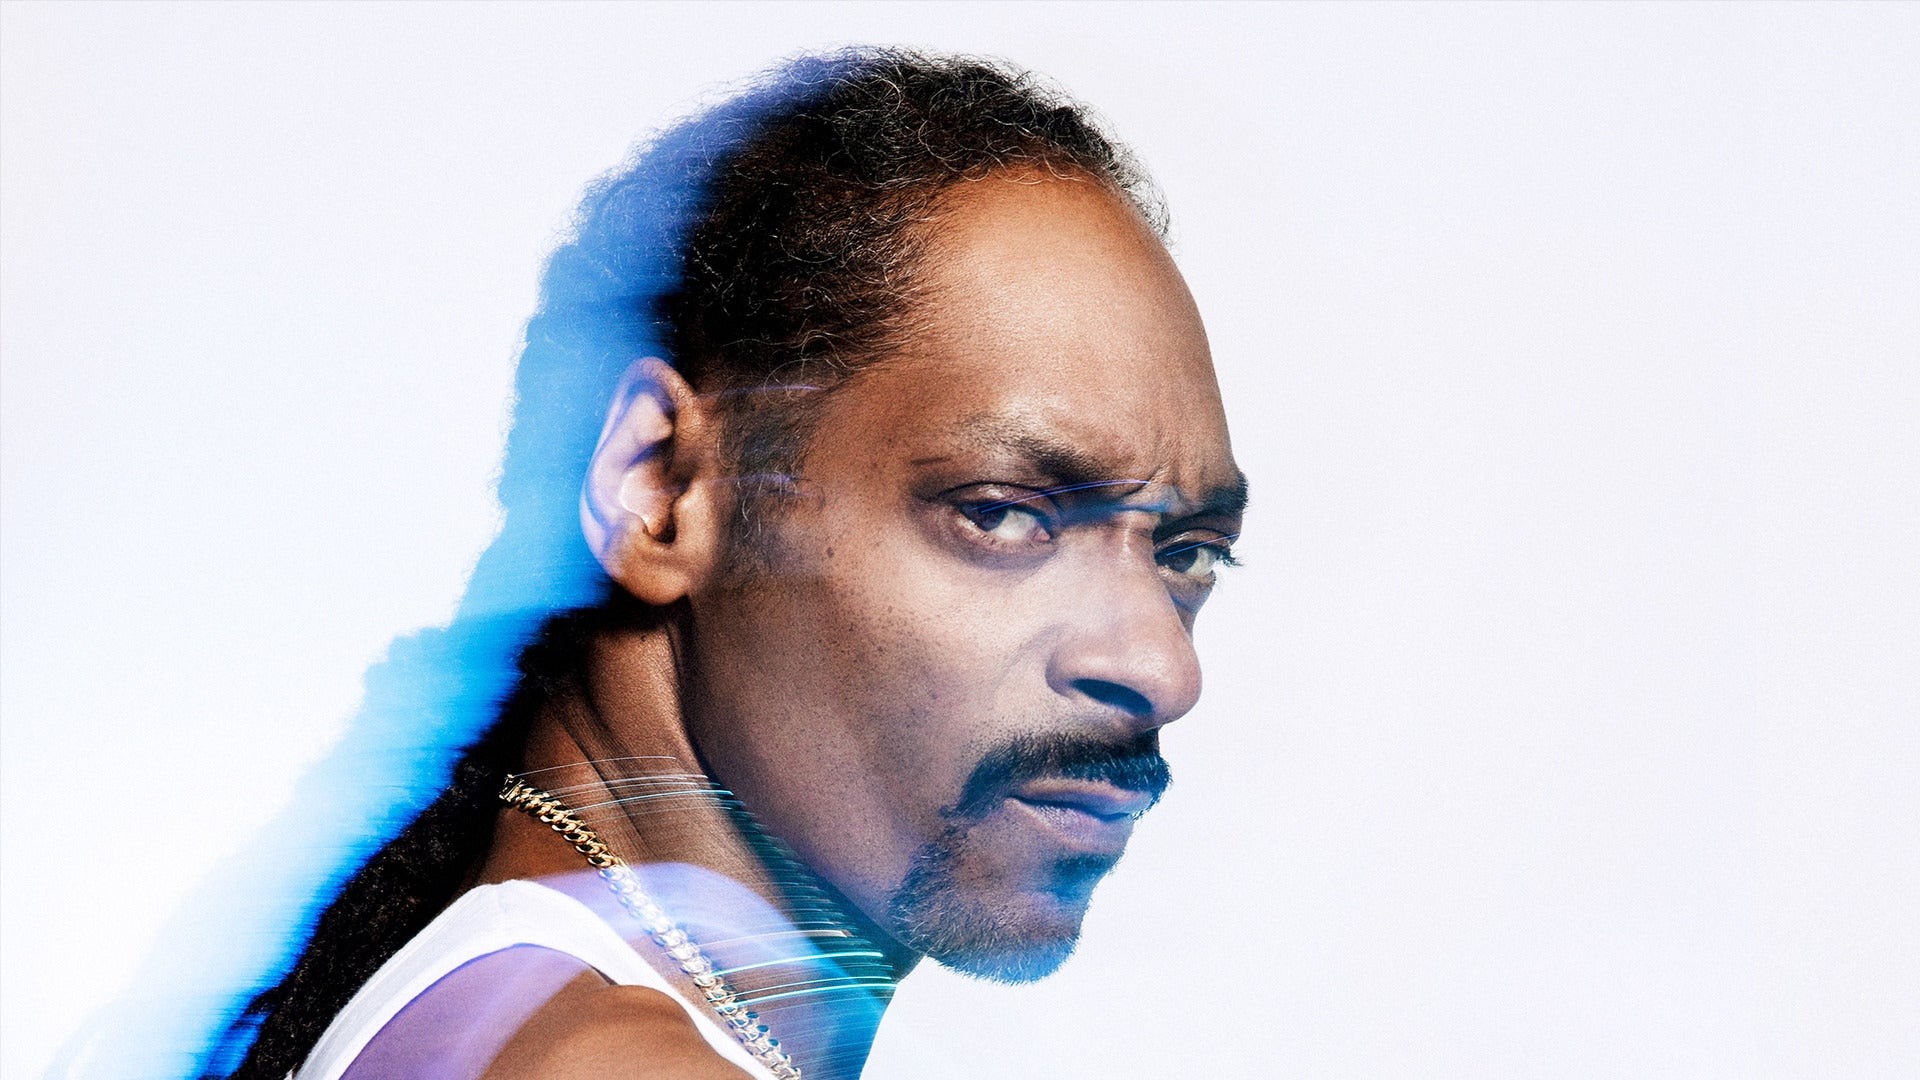 Snoop Dogg to coming to Phoenix in August